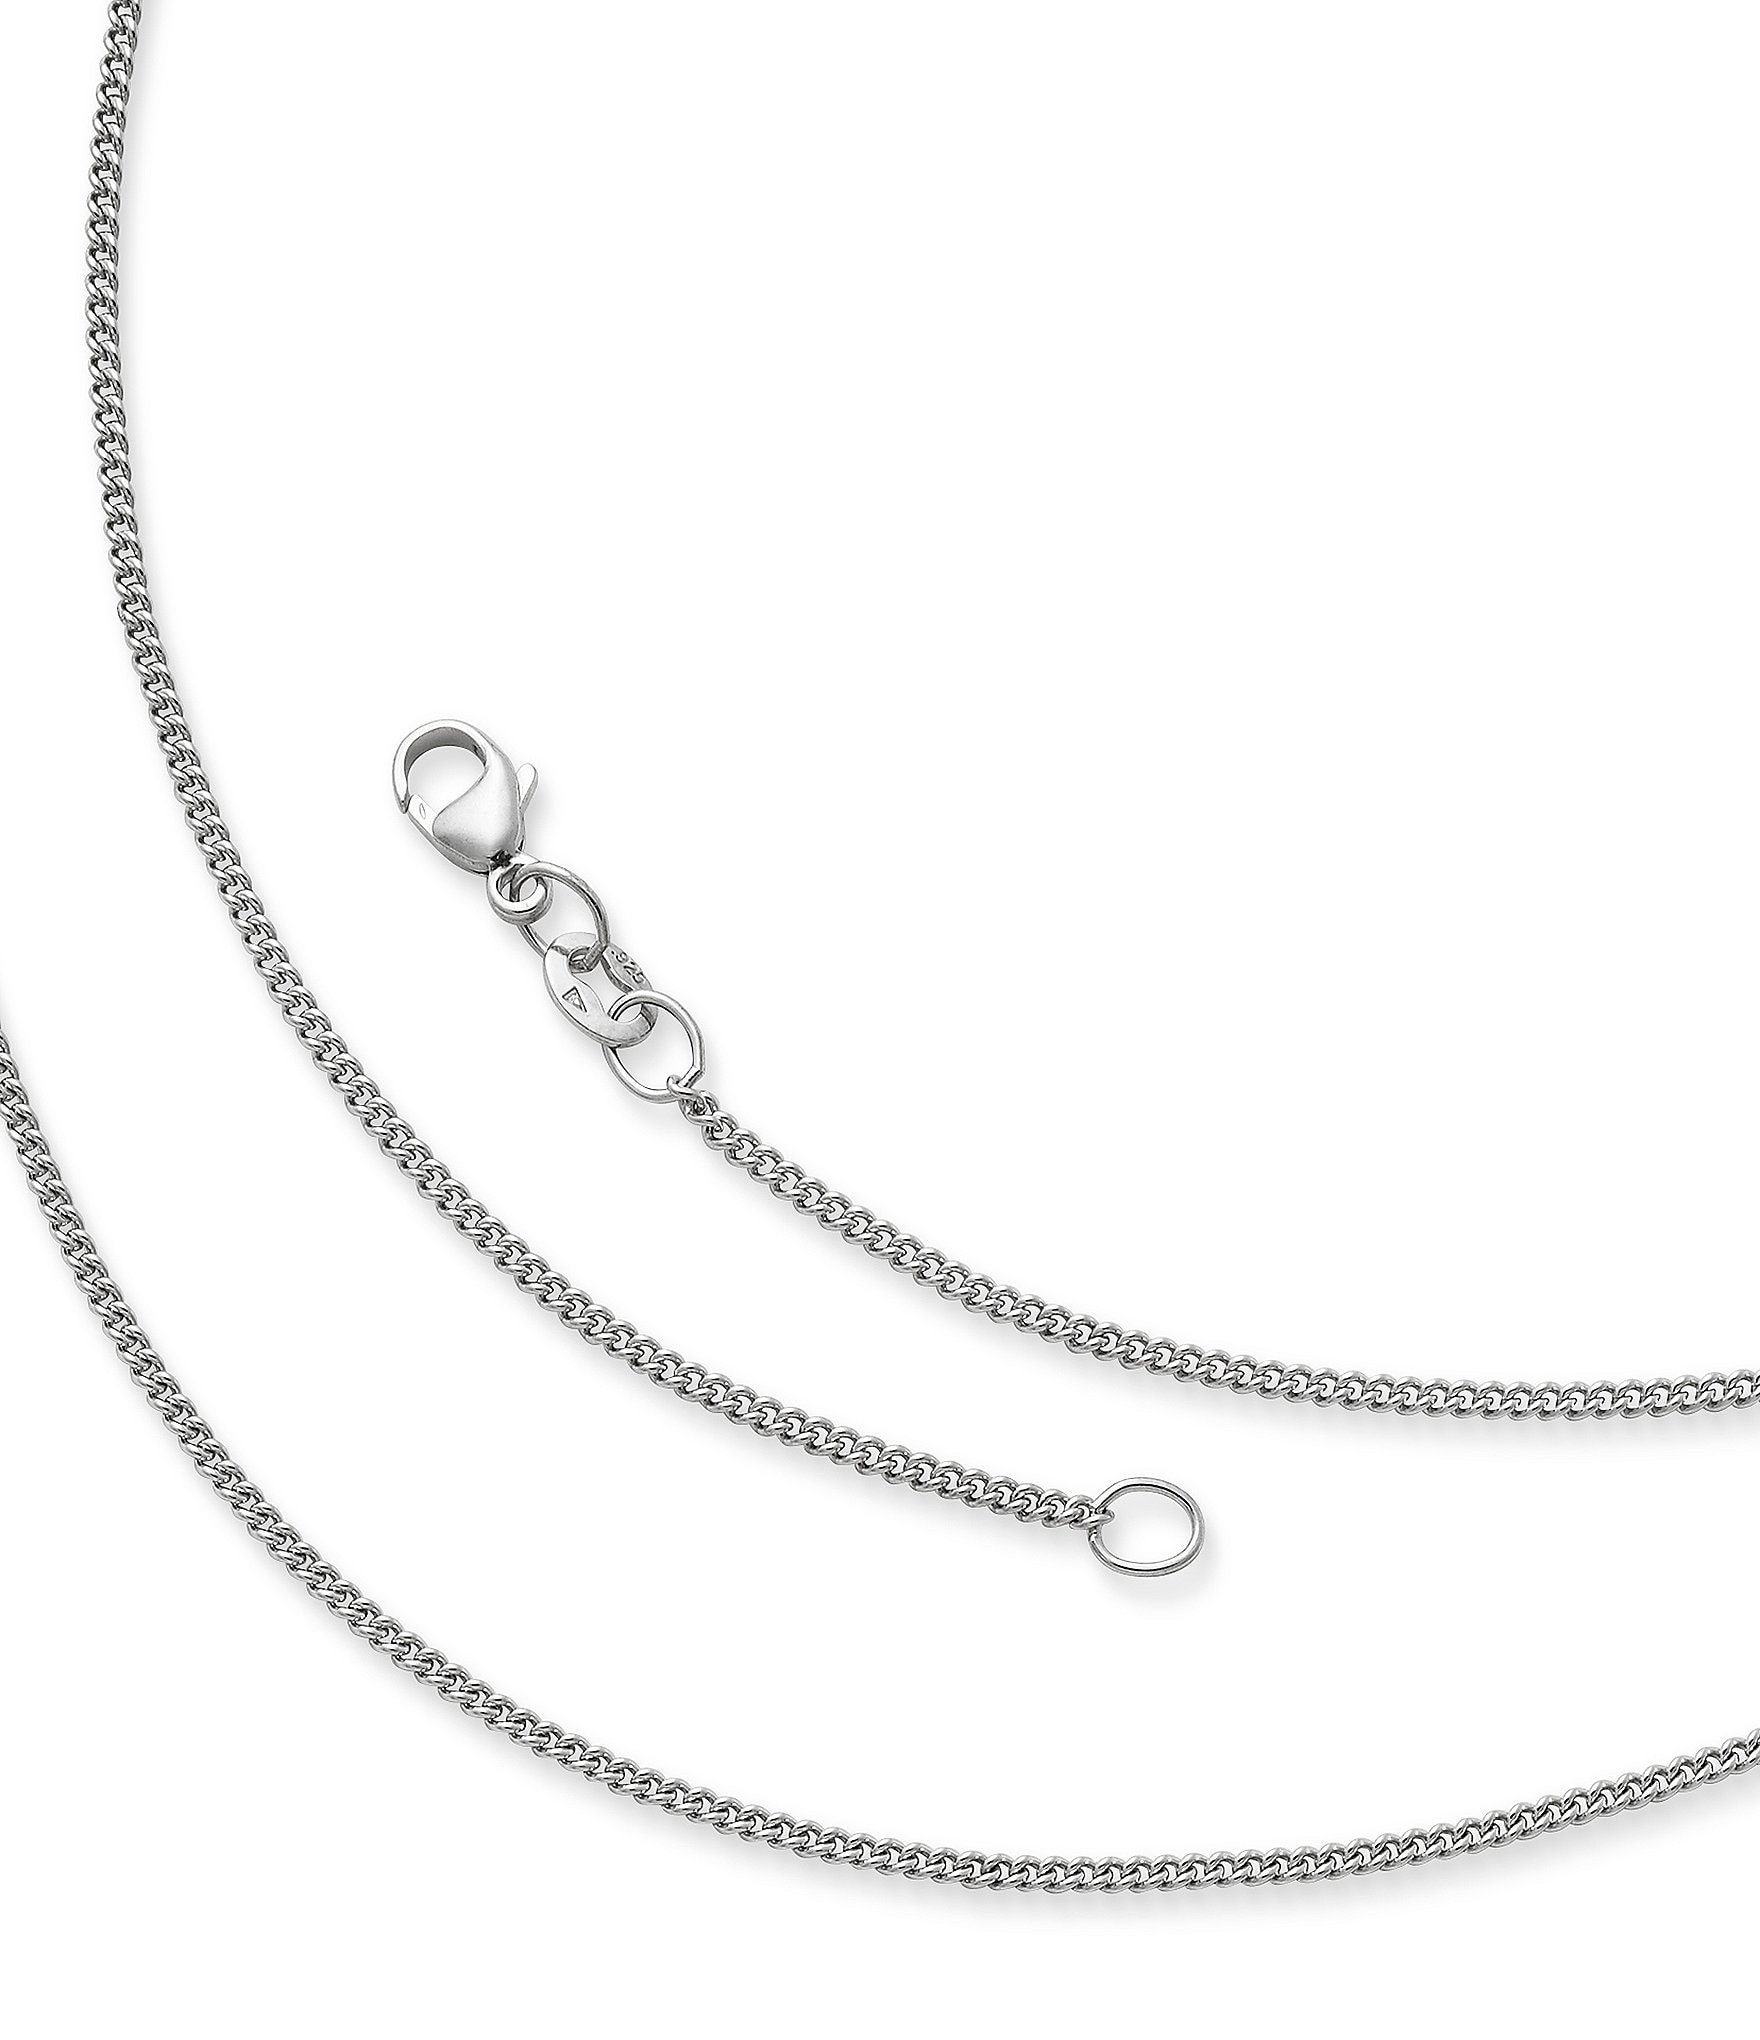 Chunky Silver 7mm Curb Chain Necklace For Women or Men - Boutique Wear RENN